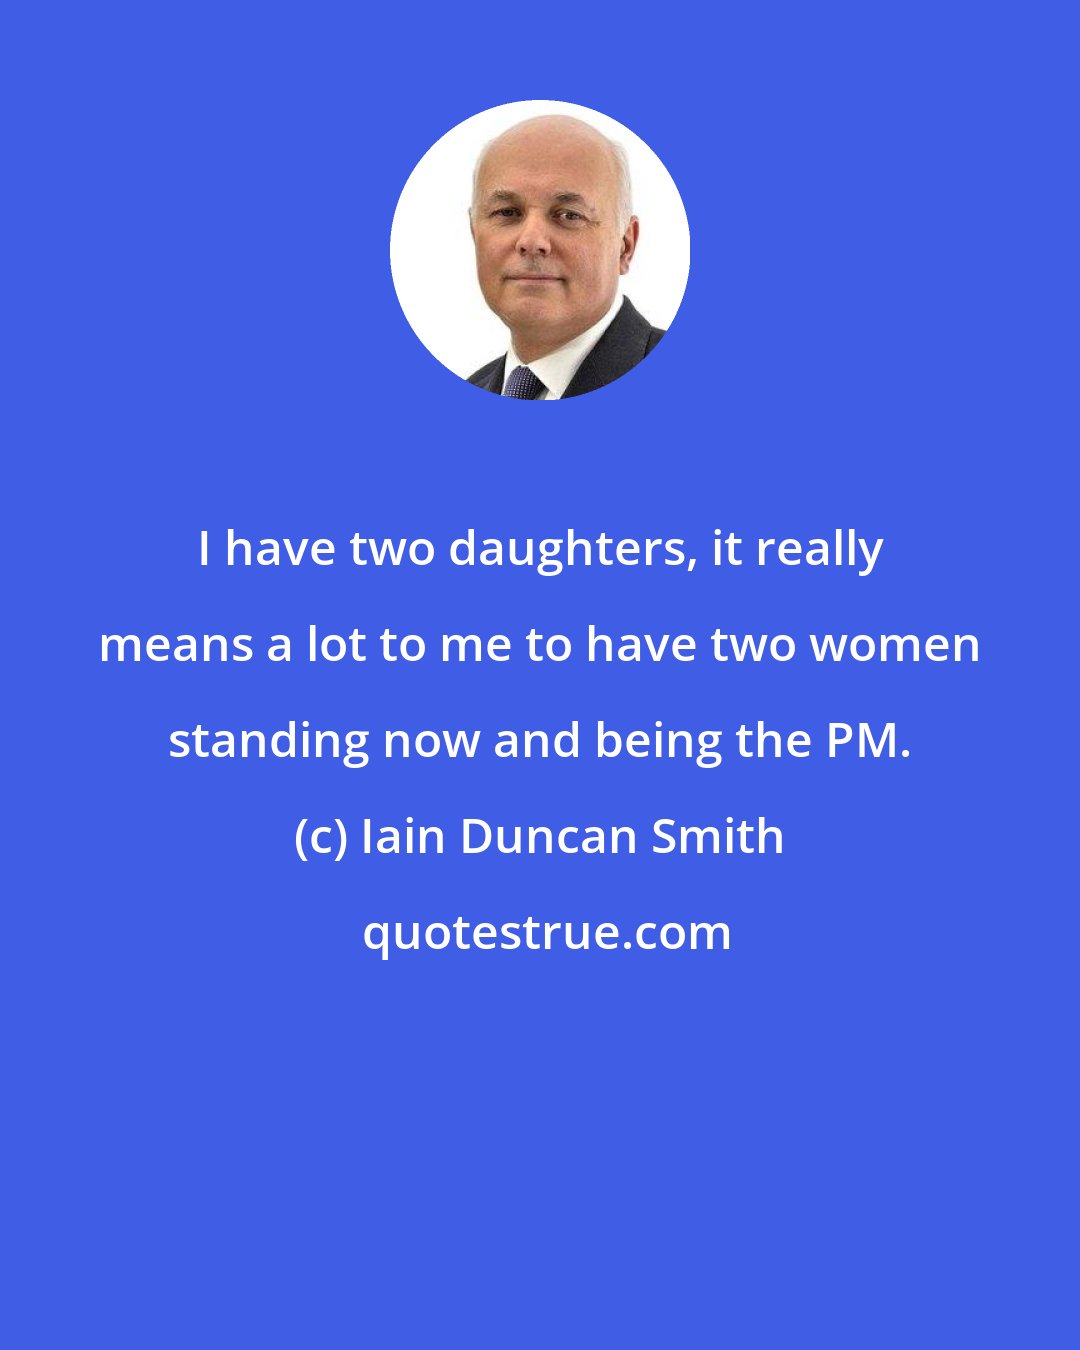 Iain Duncan Smith: I have two daughters, it really means a lot to me to have two women standing now and being the PM.